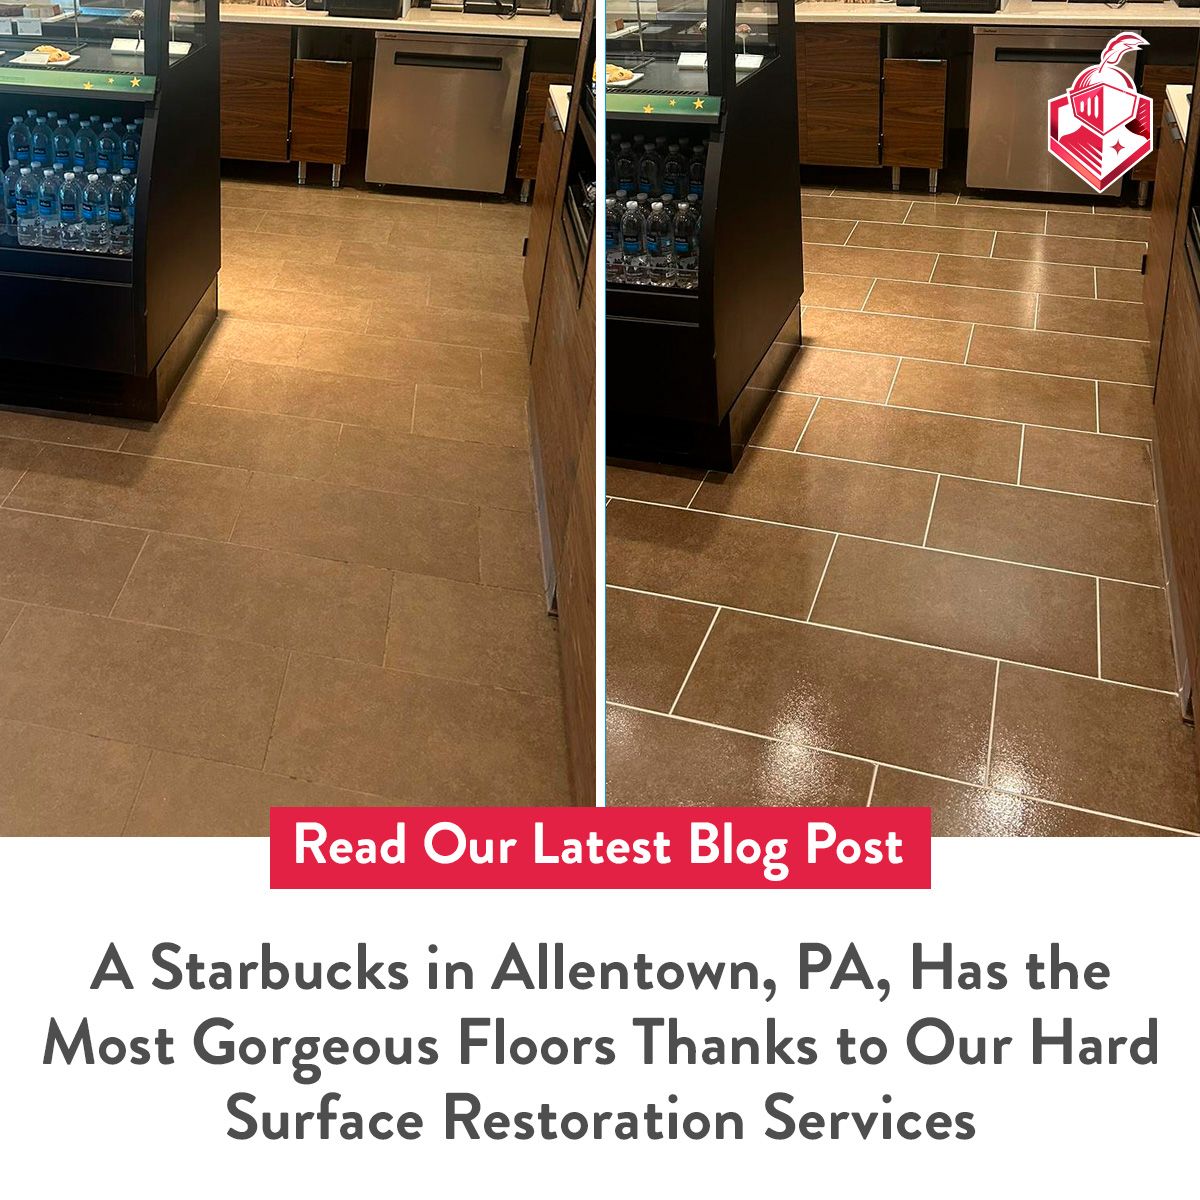 A Starbucks in Allentown, PA, Has the Most Gorgeous Floors Thanks to Our Hard Surface Restoration Services